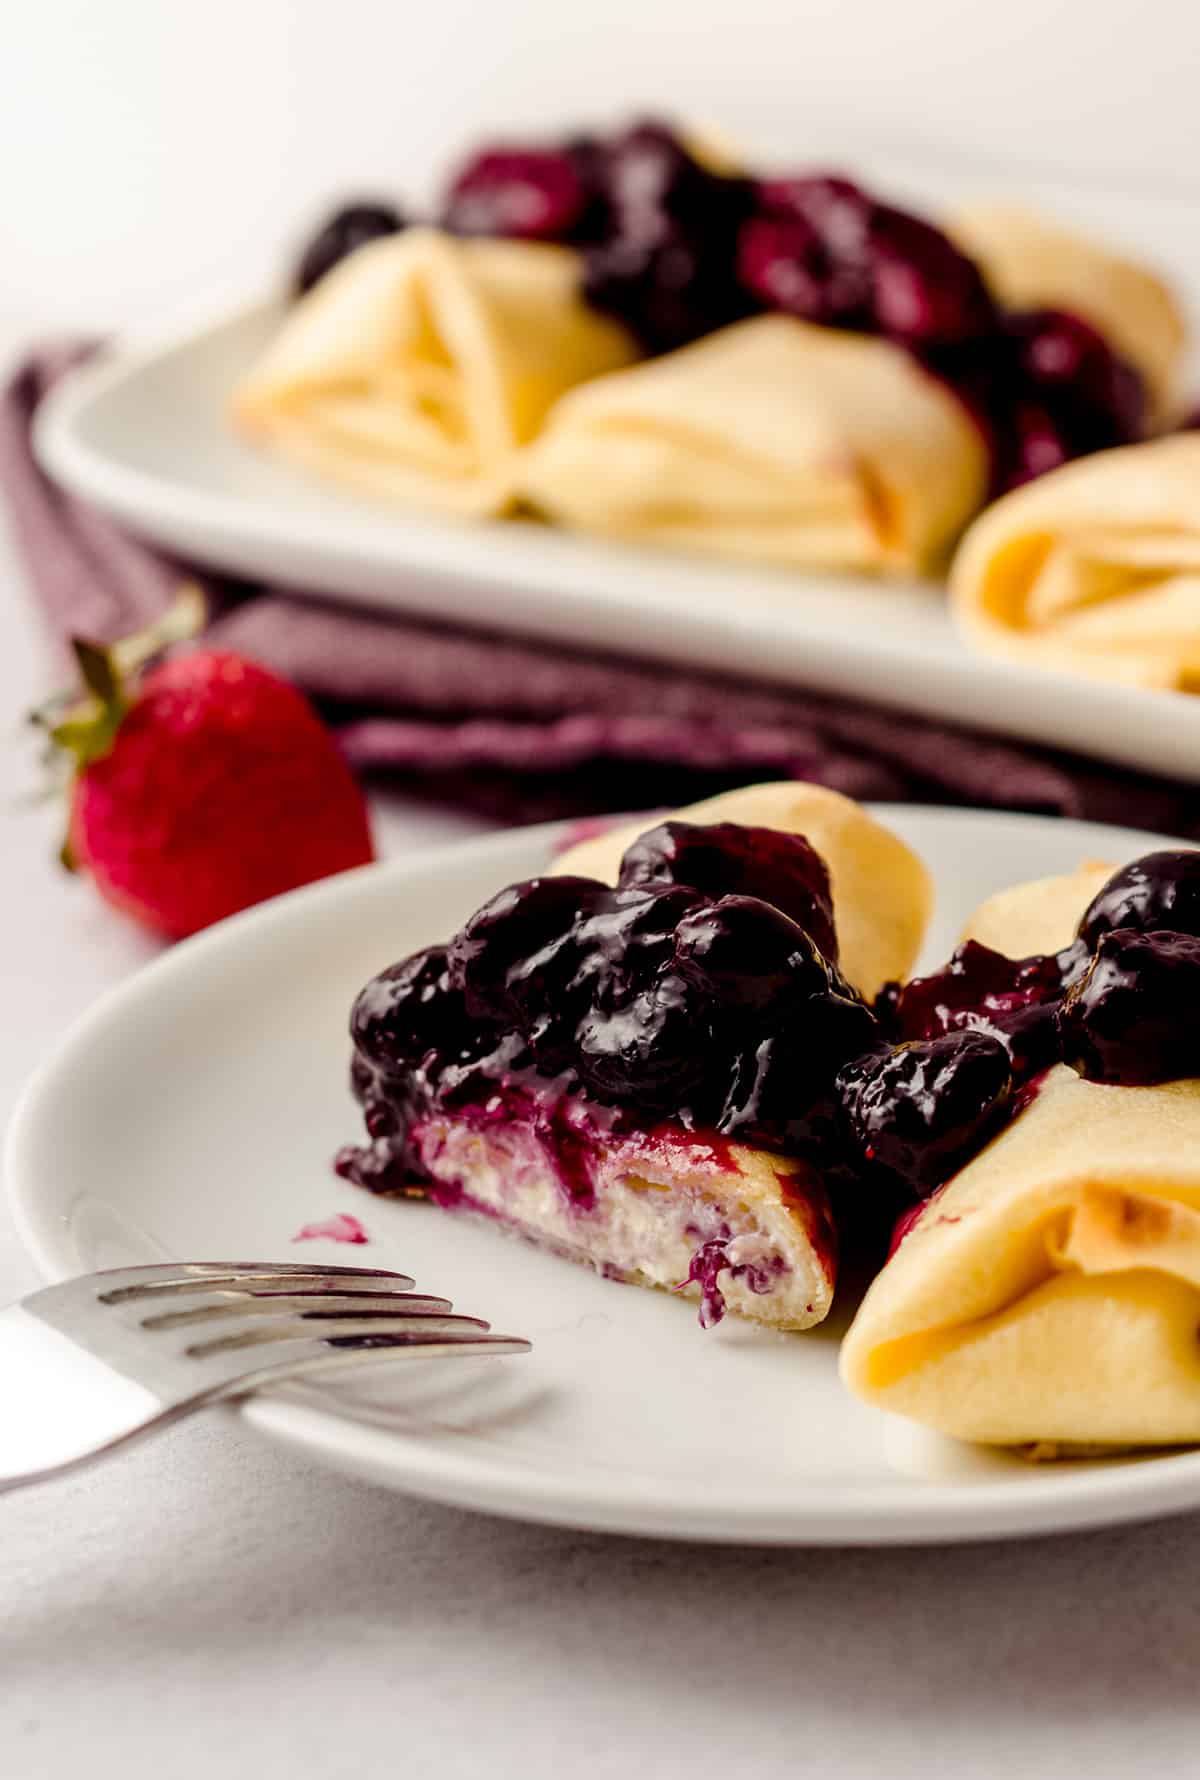 Rolled cheese blintzes that have been cut into it, topped with a berry compote.